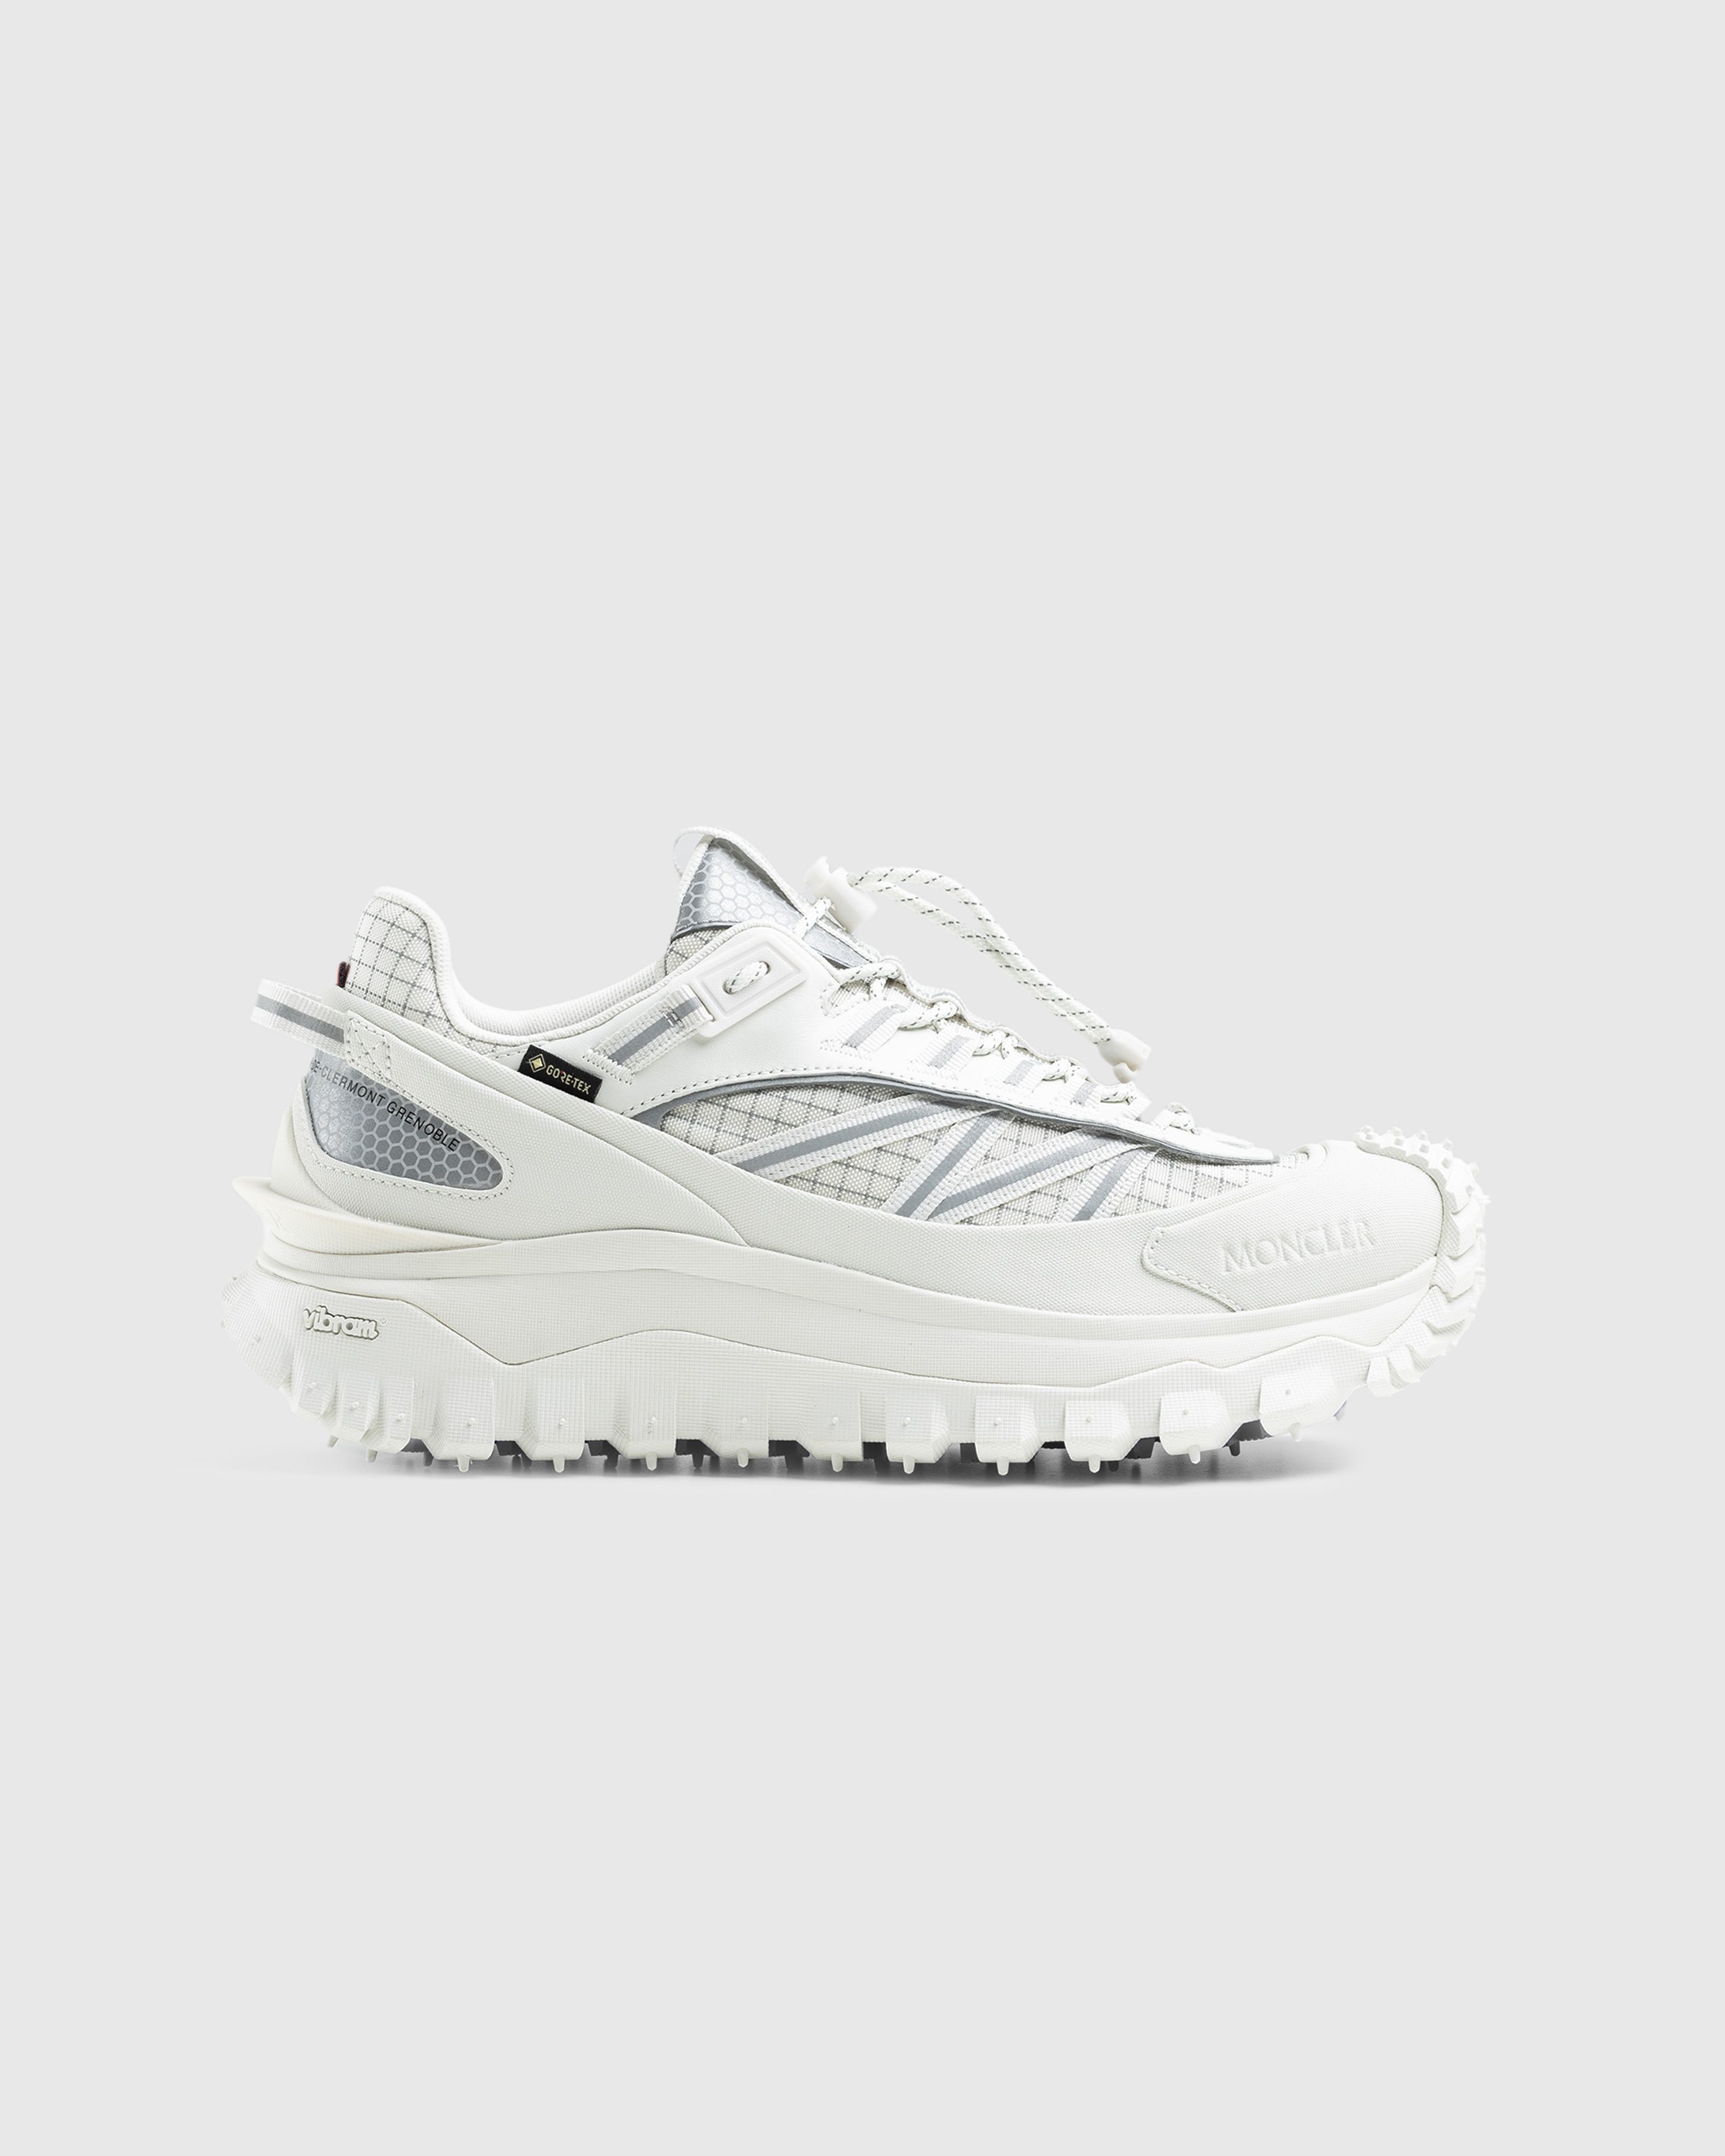 Moncler - Trailgrip Gtx Low Top Sneakers White - Footwear - White - Image 1